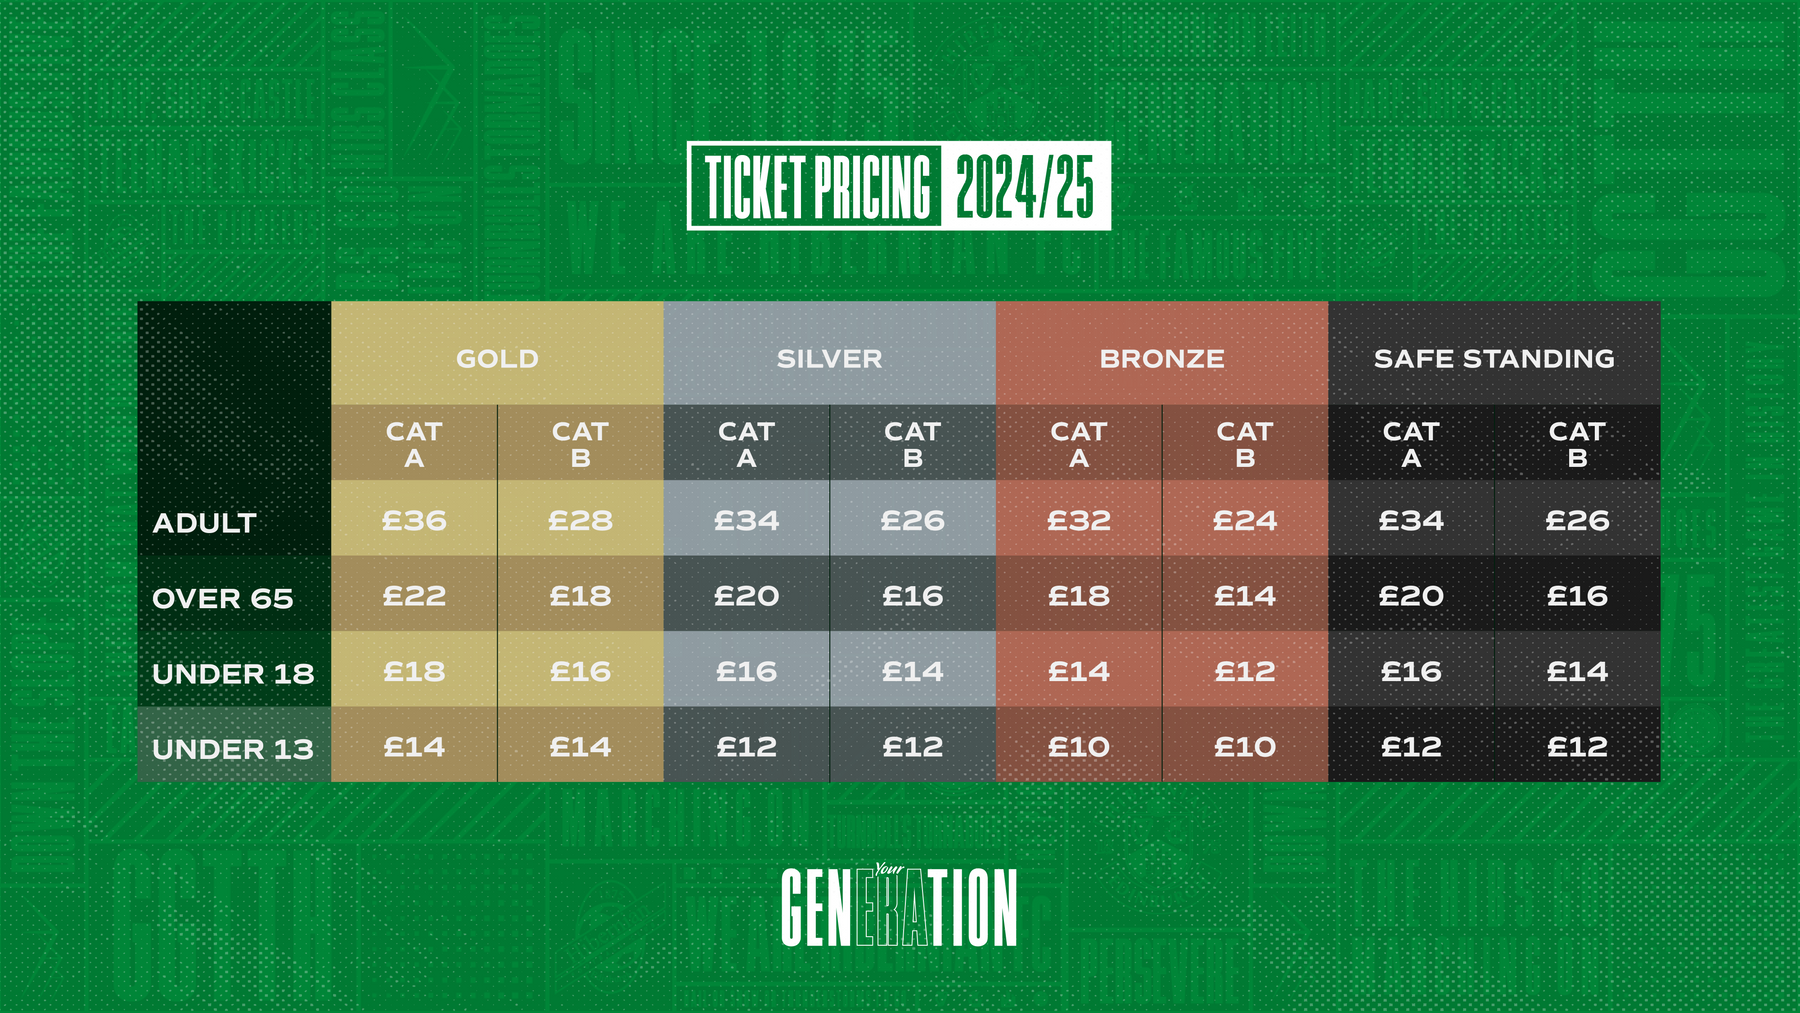 Ticket-Pricing-2024-25_ST_24-25_Pricing.png